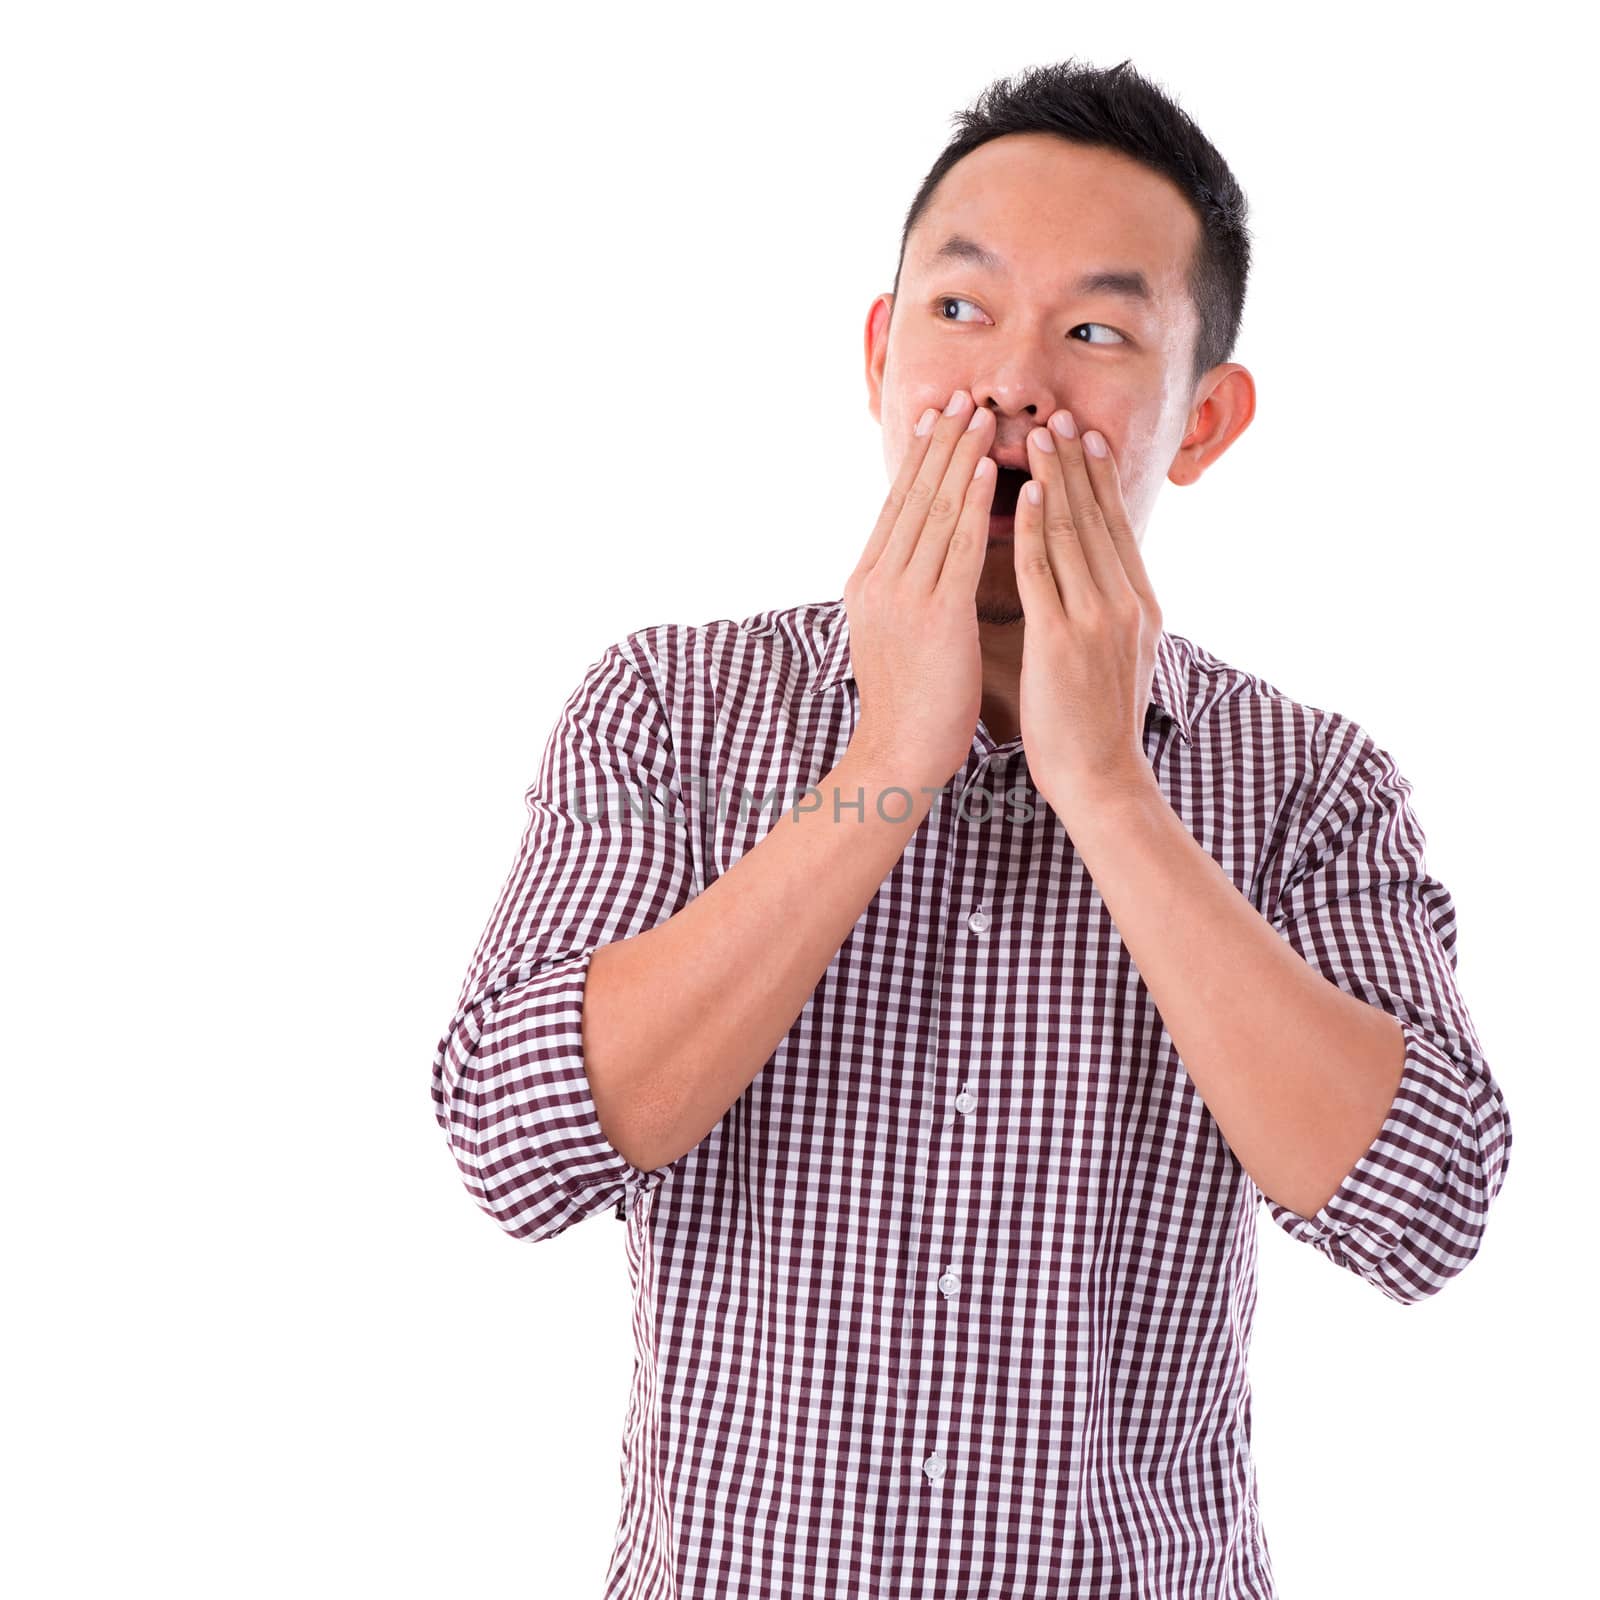 Shocked Asian man covering his mouth by hand, isolated on white background. Asian male model.